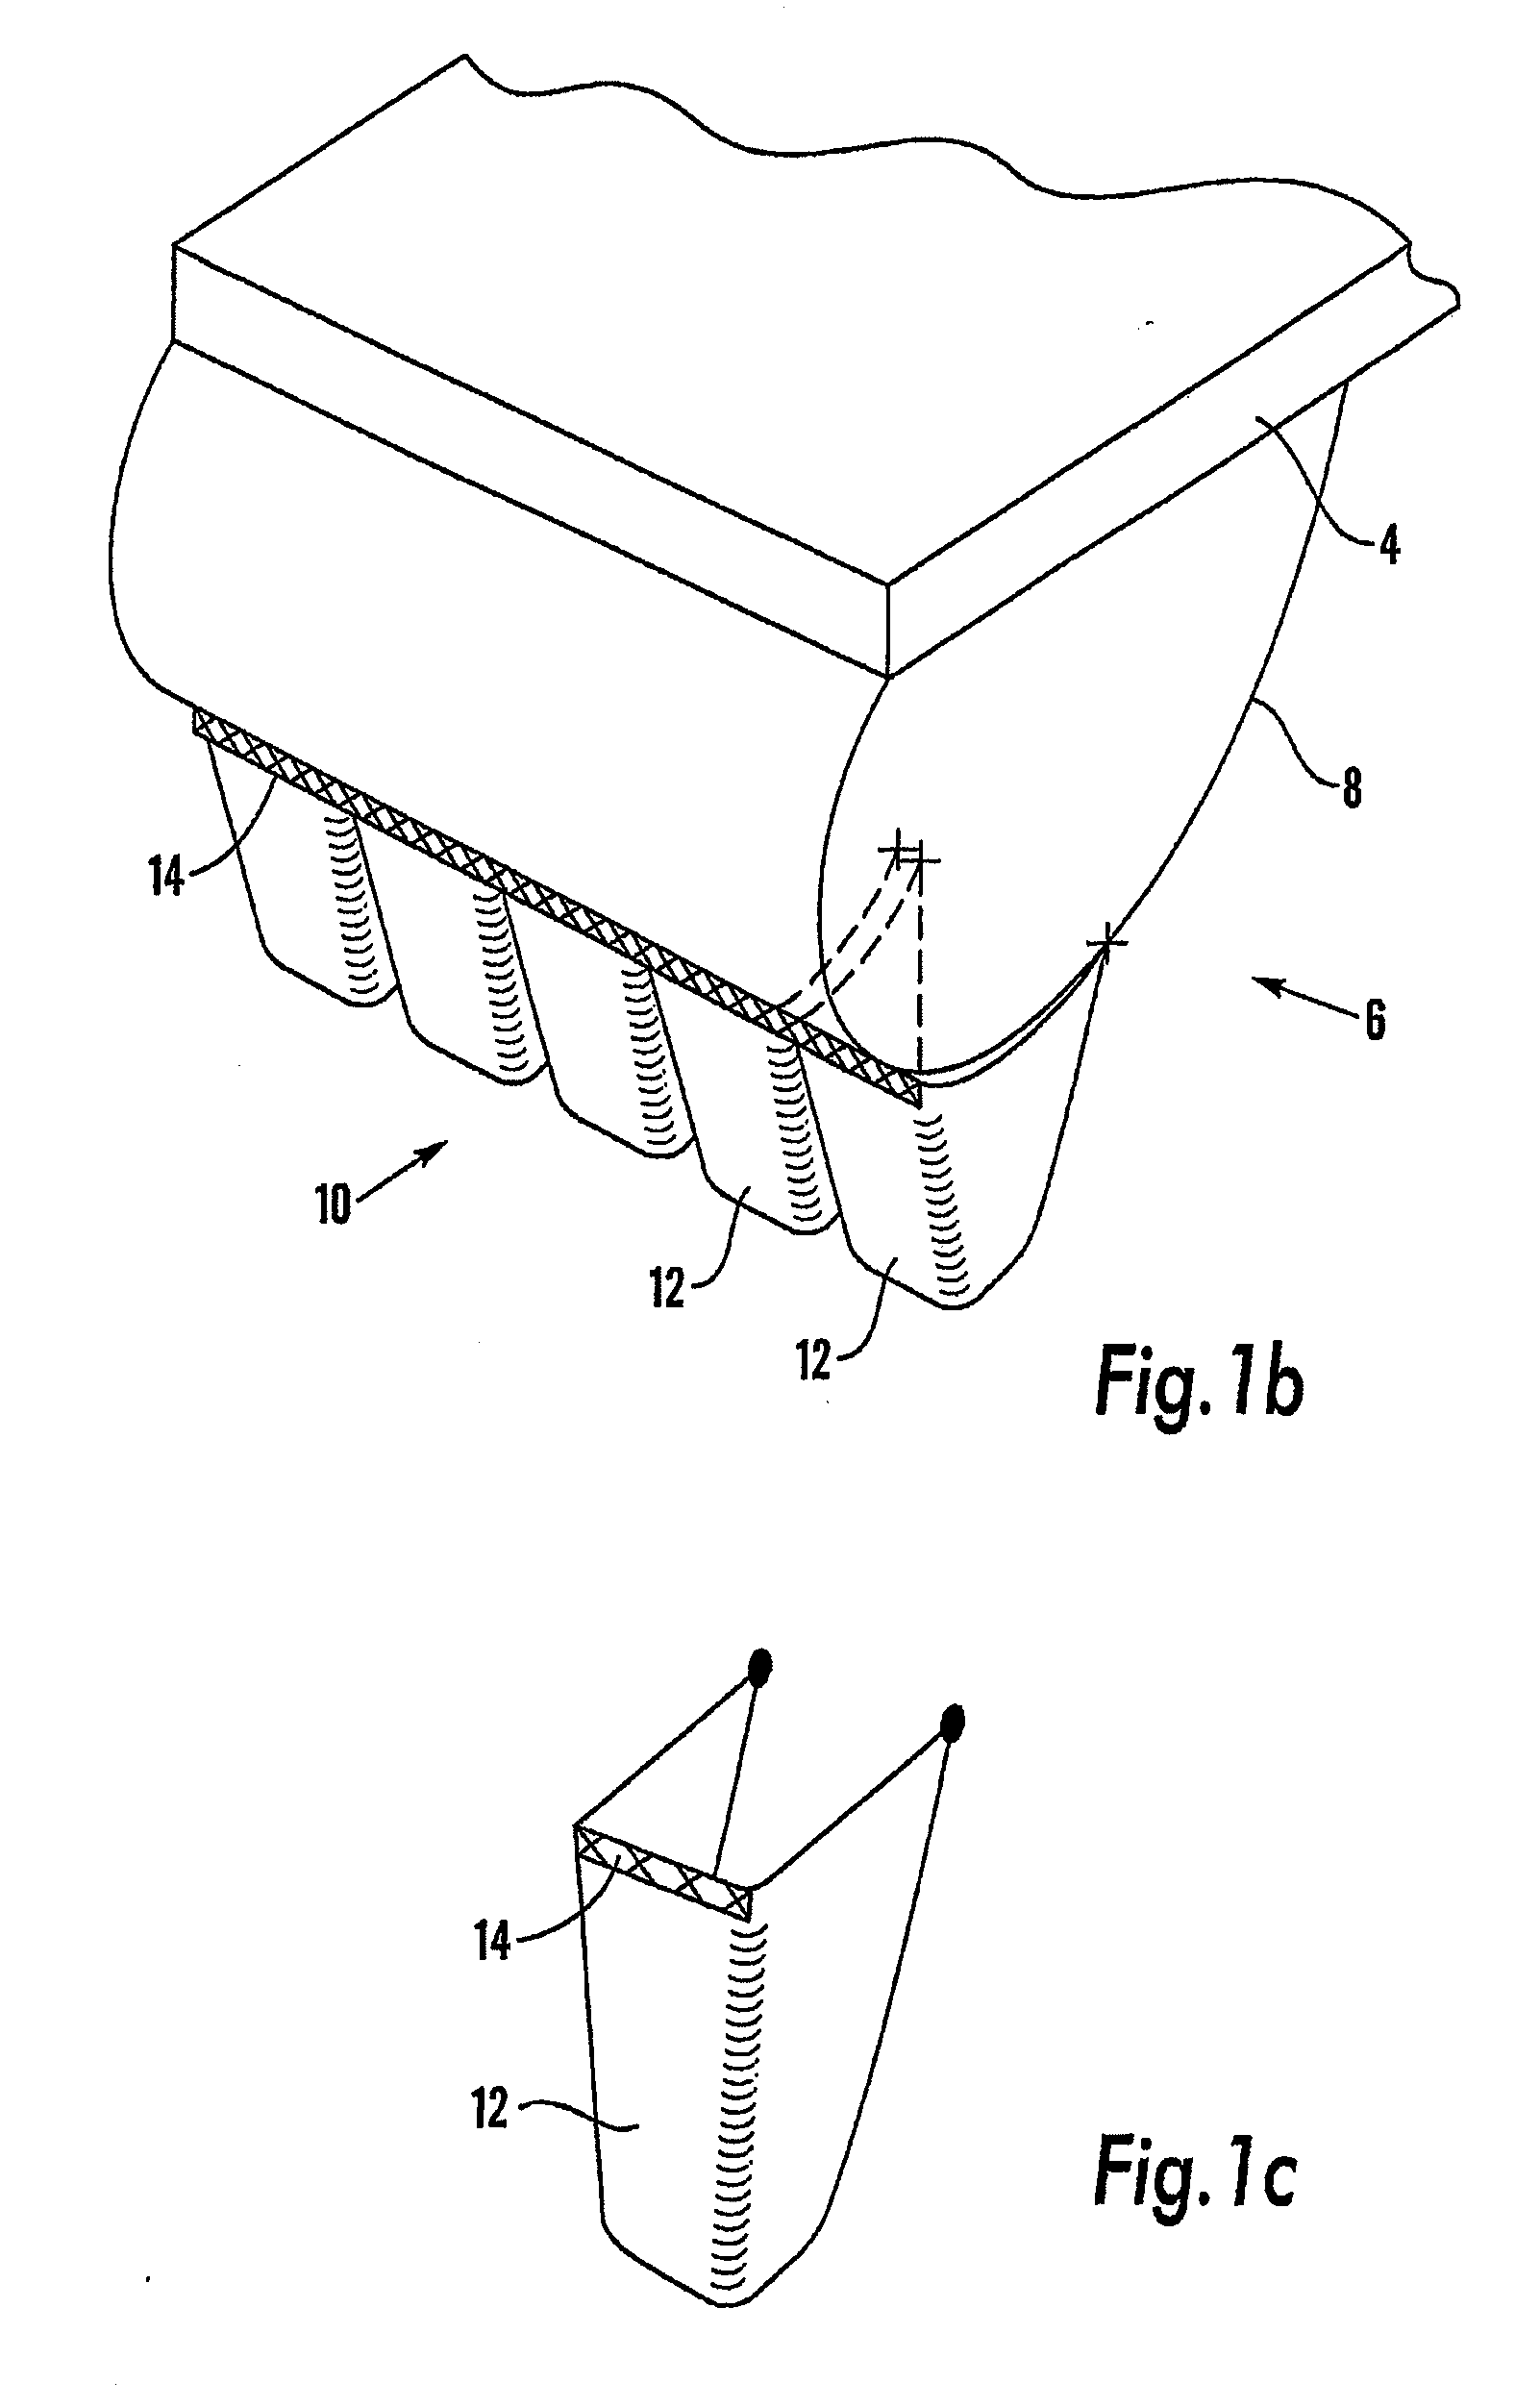 Air cushion landing system and method of operation